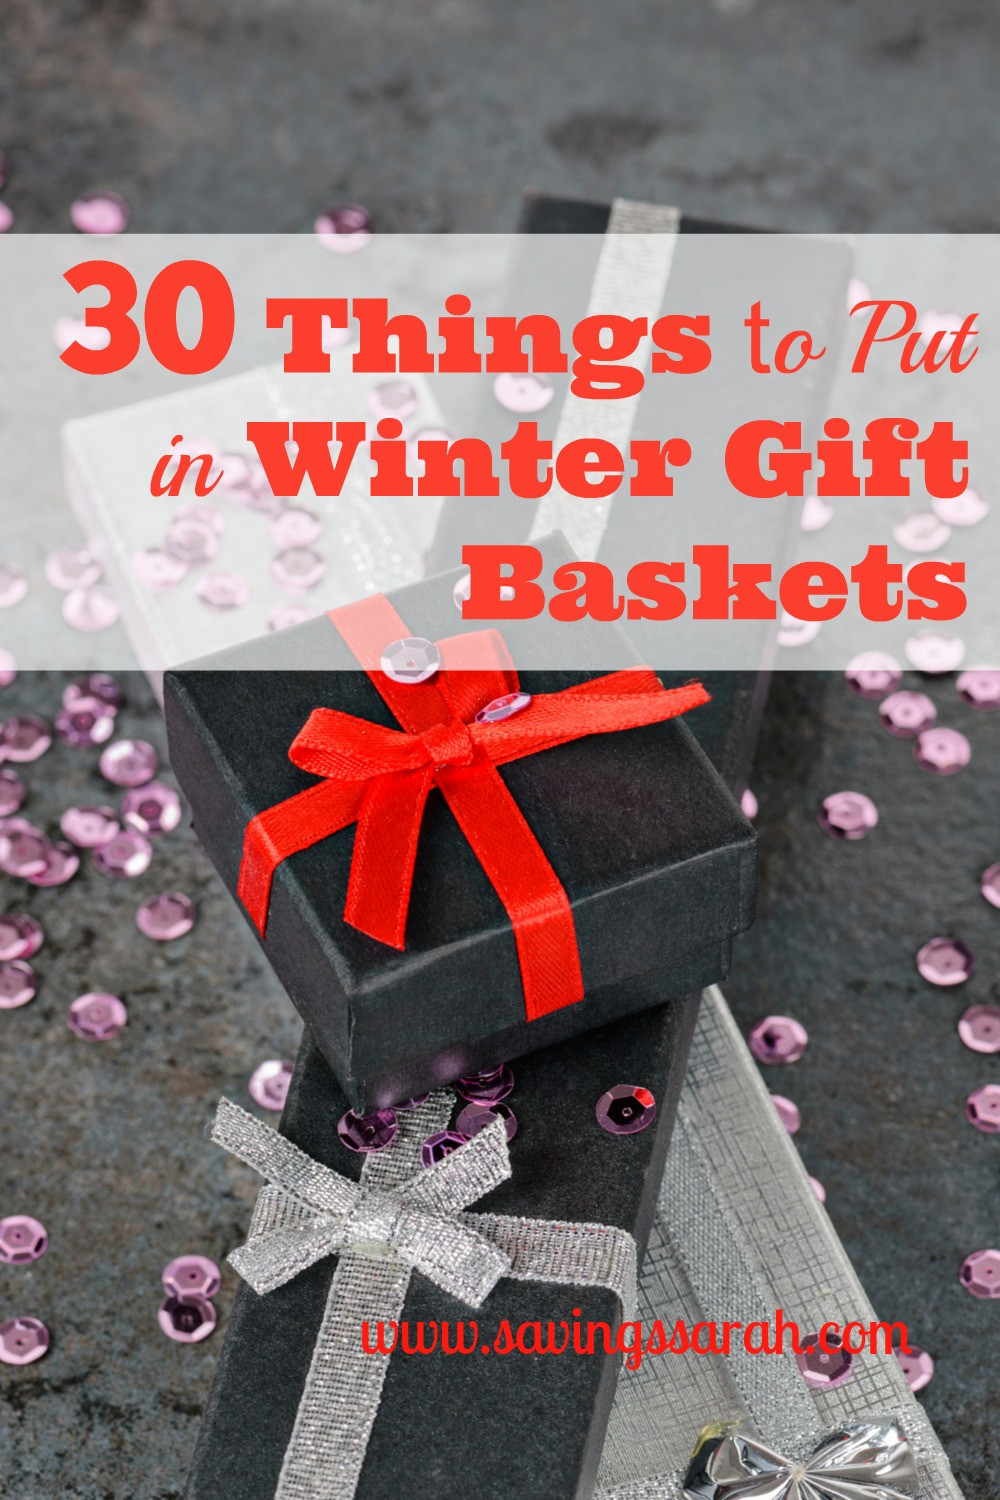 Winter Themed Gift Basket Ideas
 30 Things to Put In Winter Gift Baskets Earning and